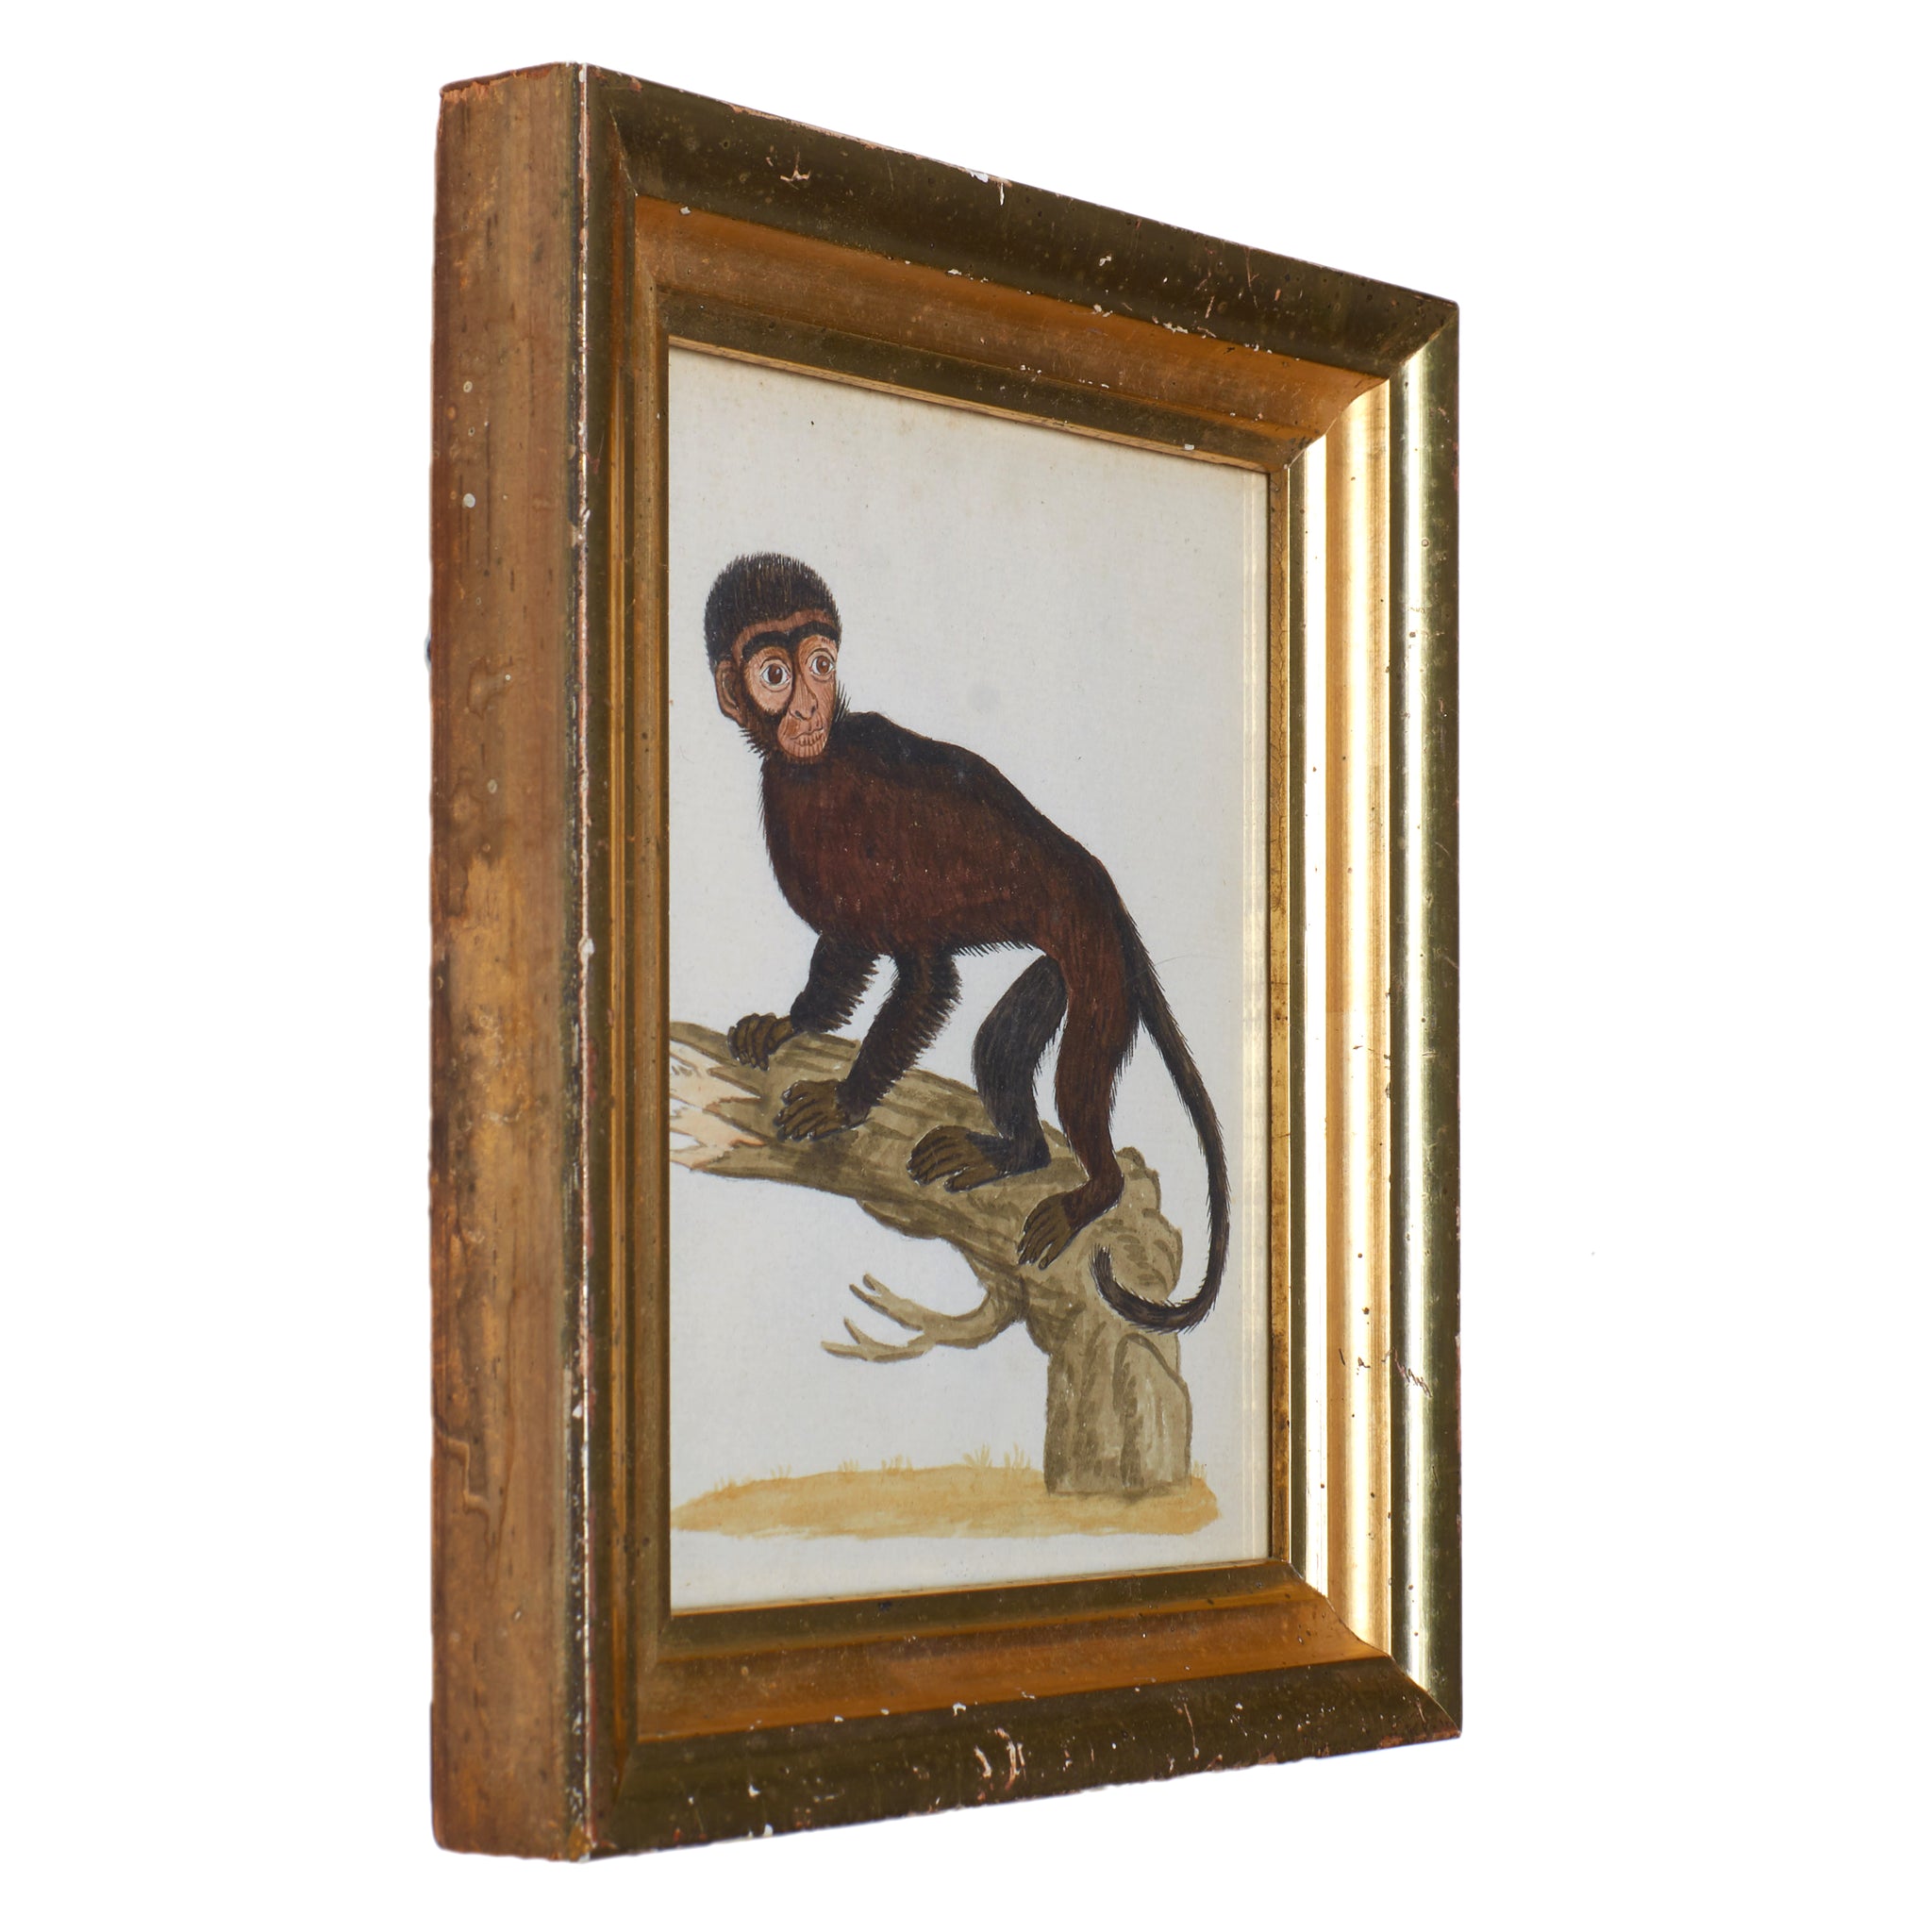 18th Century Monkey Watercolors - A Pair